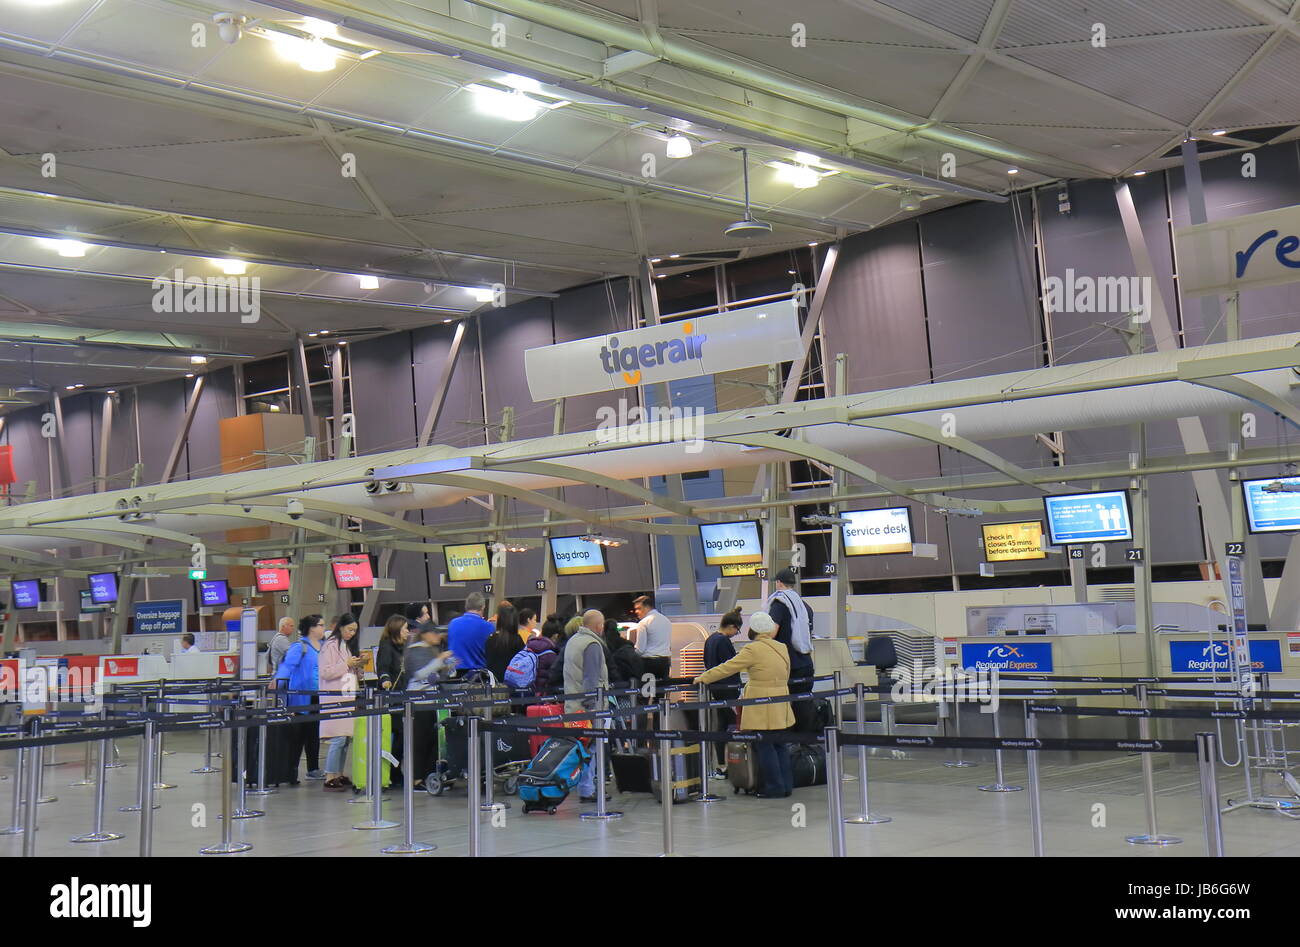 People check in at Tigerair counter Sydney Airport in Sydney Australia. Stock Photo